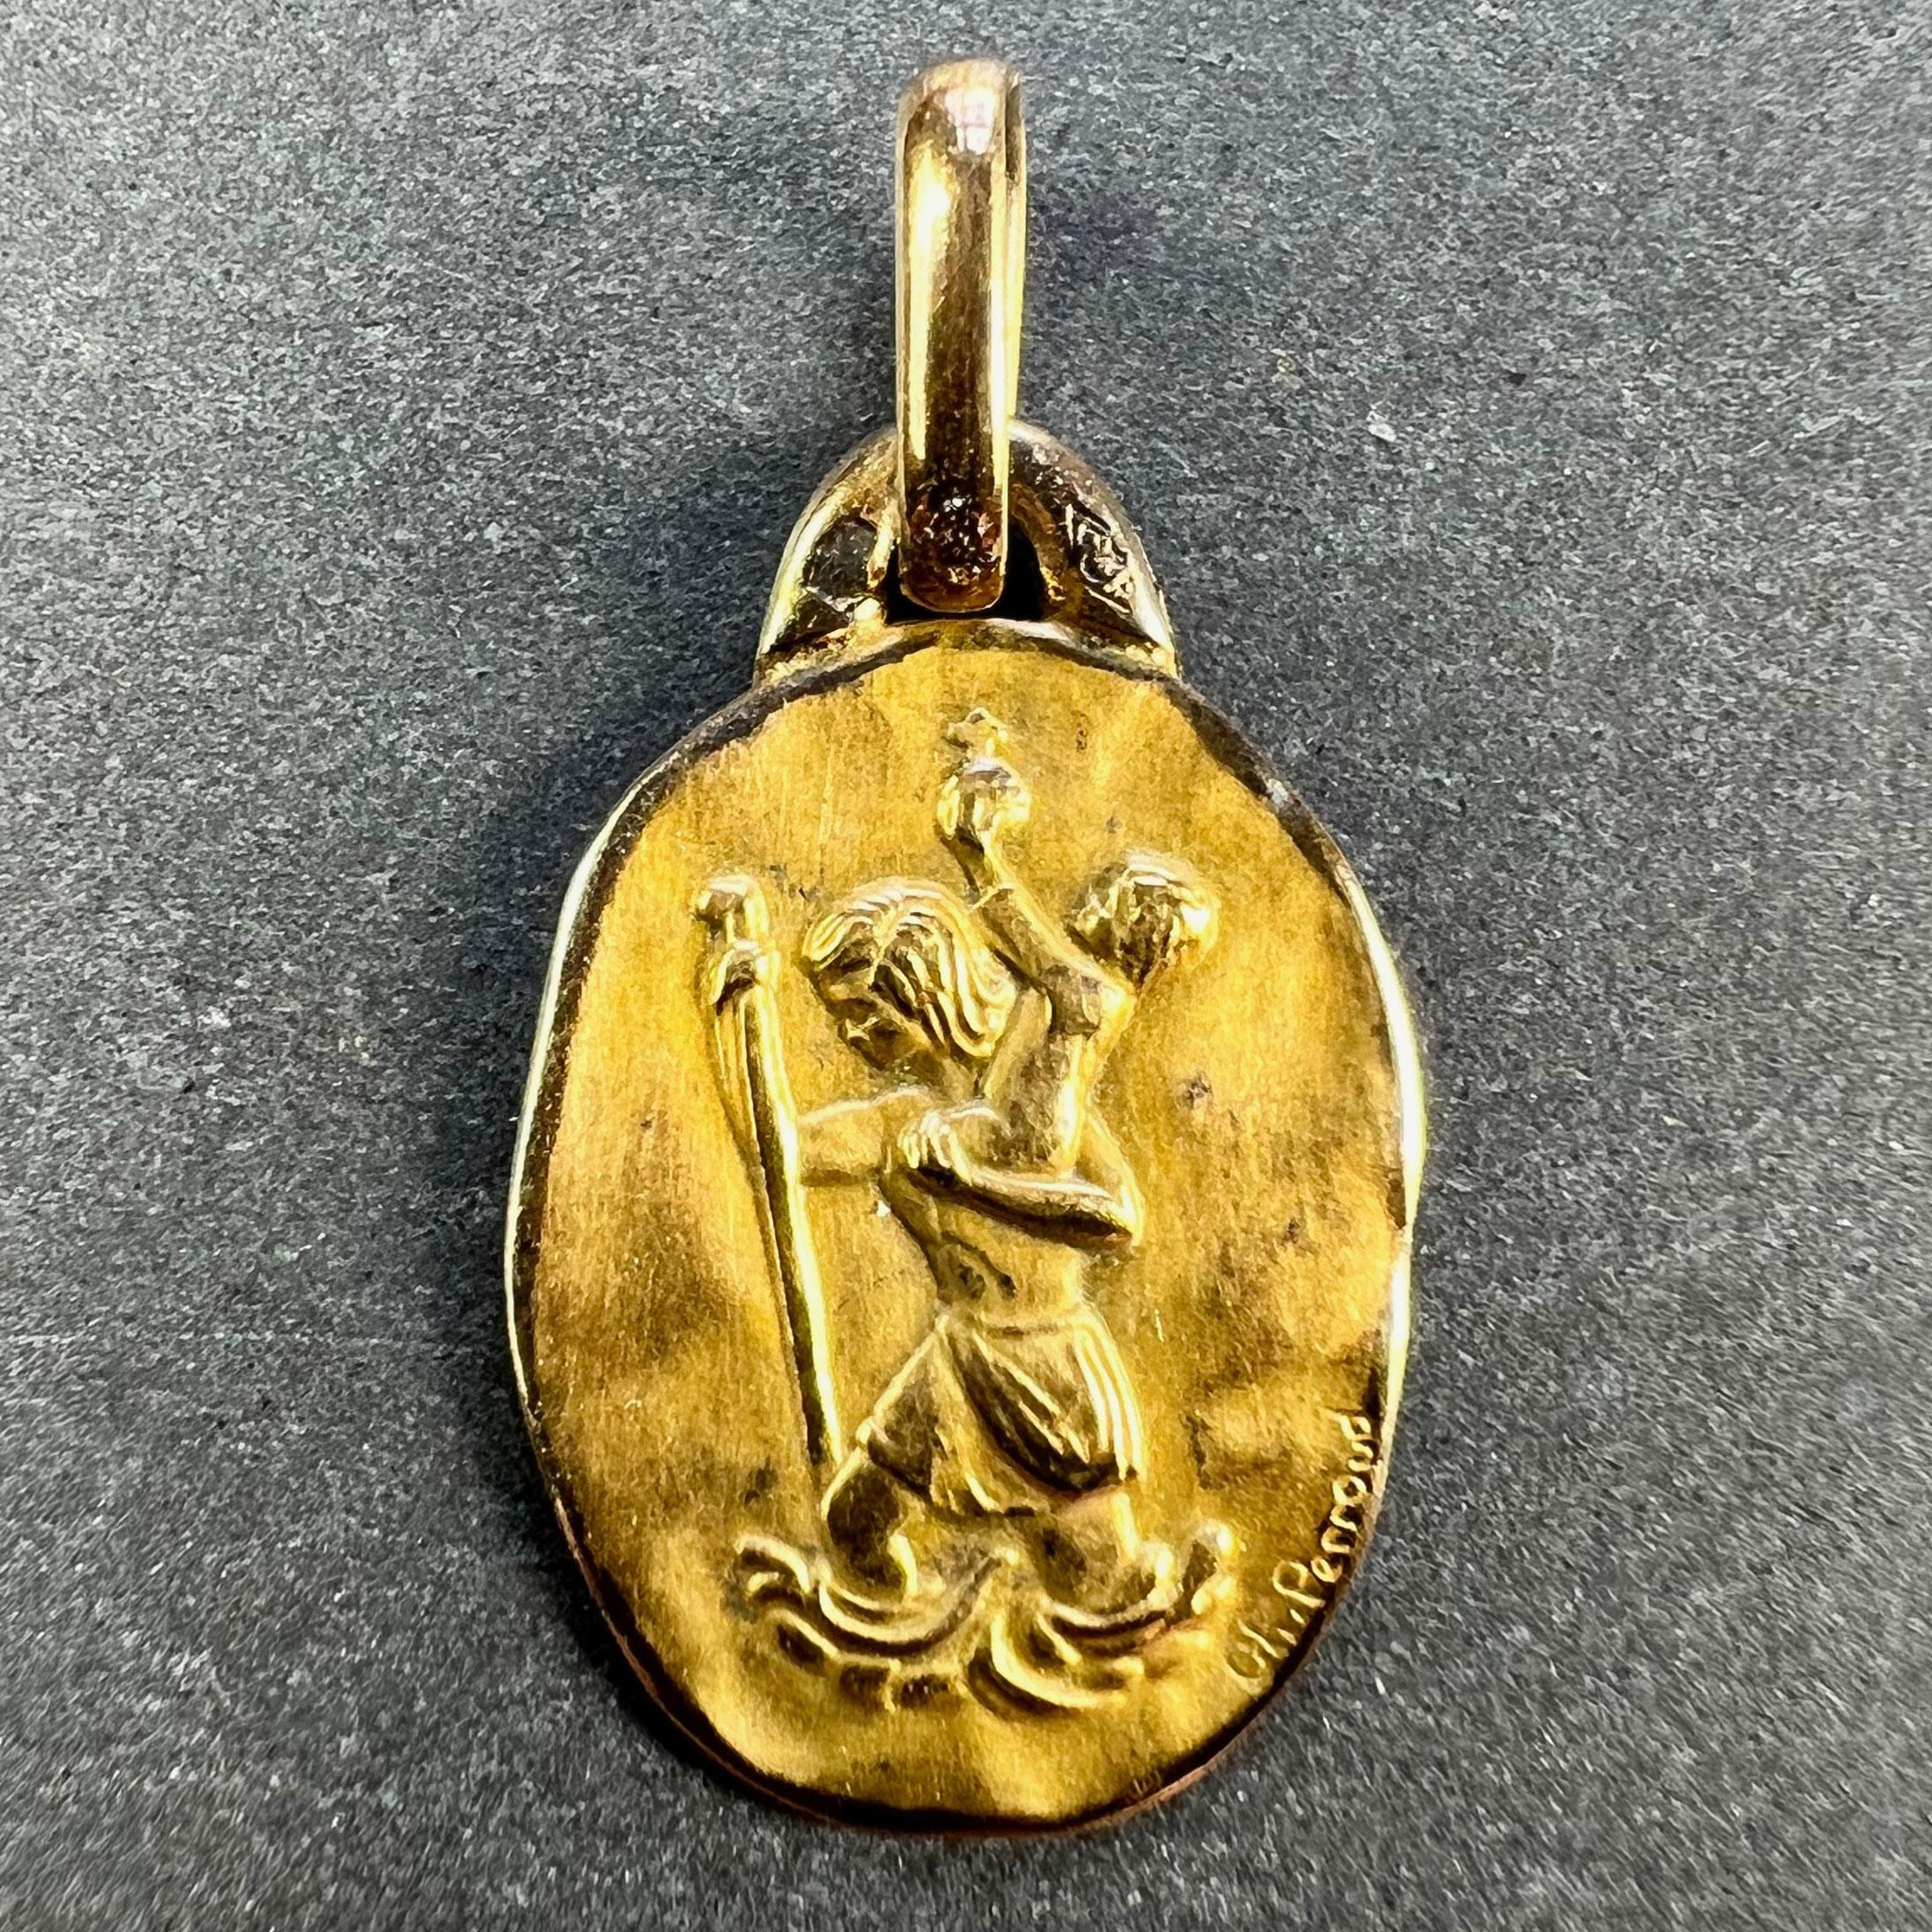 A French 18 karat (18K) yellow gold charm pendant or medal by Perroud depicting St Christopher carrying the infant Christ across the river. Stamped with the eagle's head for French manufacture and 18 karat gold, Perroud's makers mark, and signed Ch,